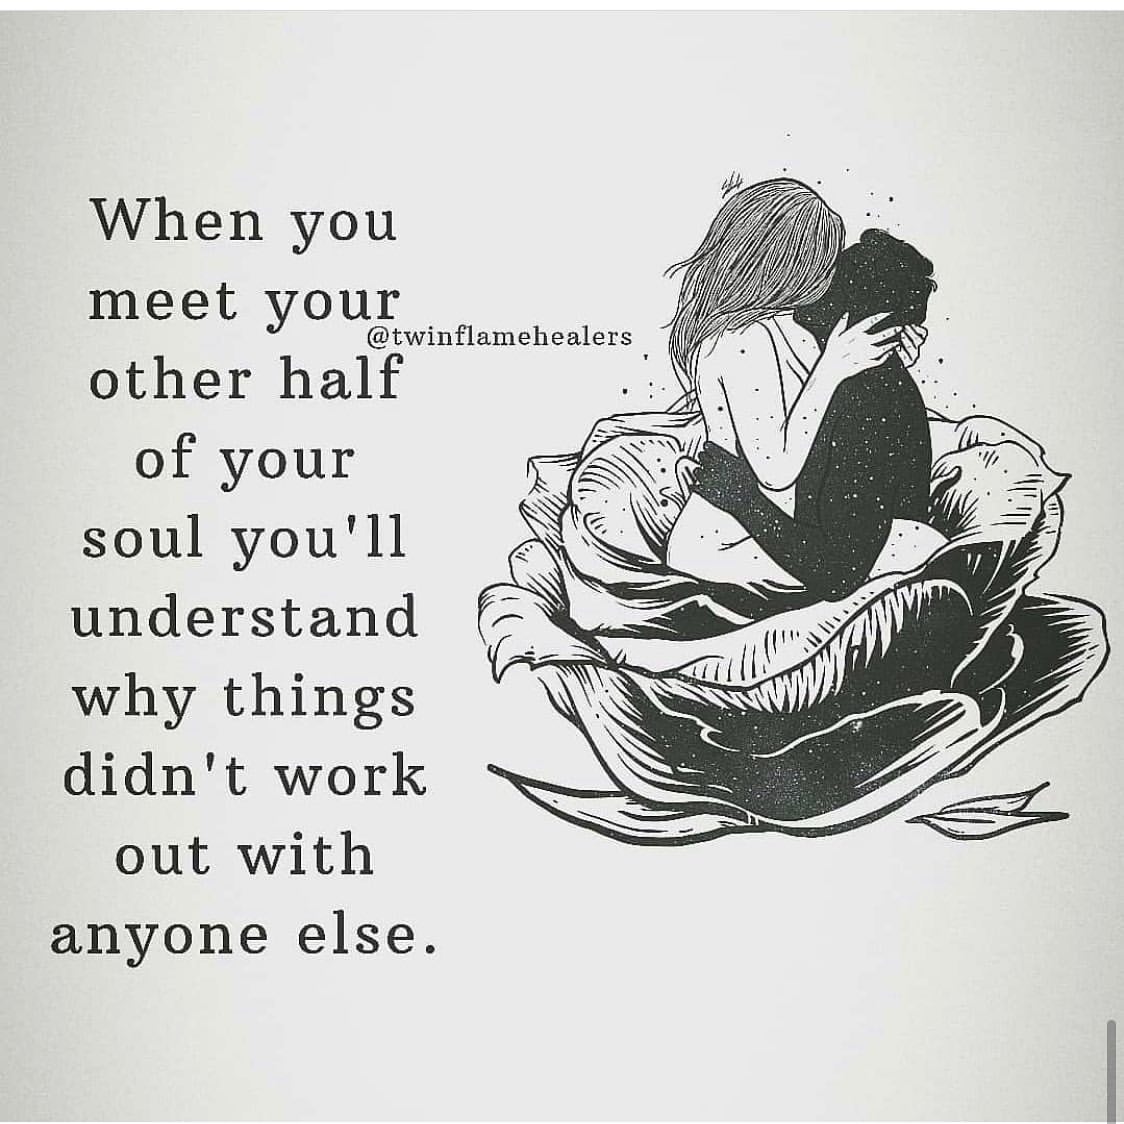 When you meet your other half of your soul you'll understand why things didn't work out with anyone else.